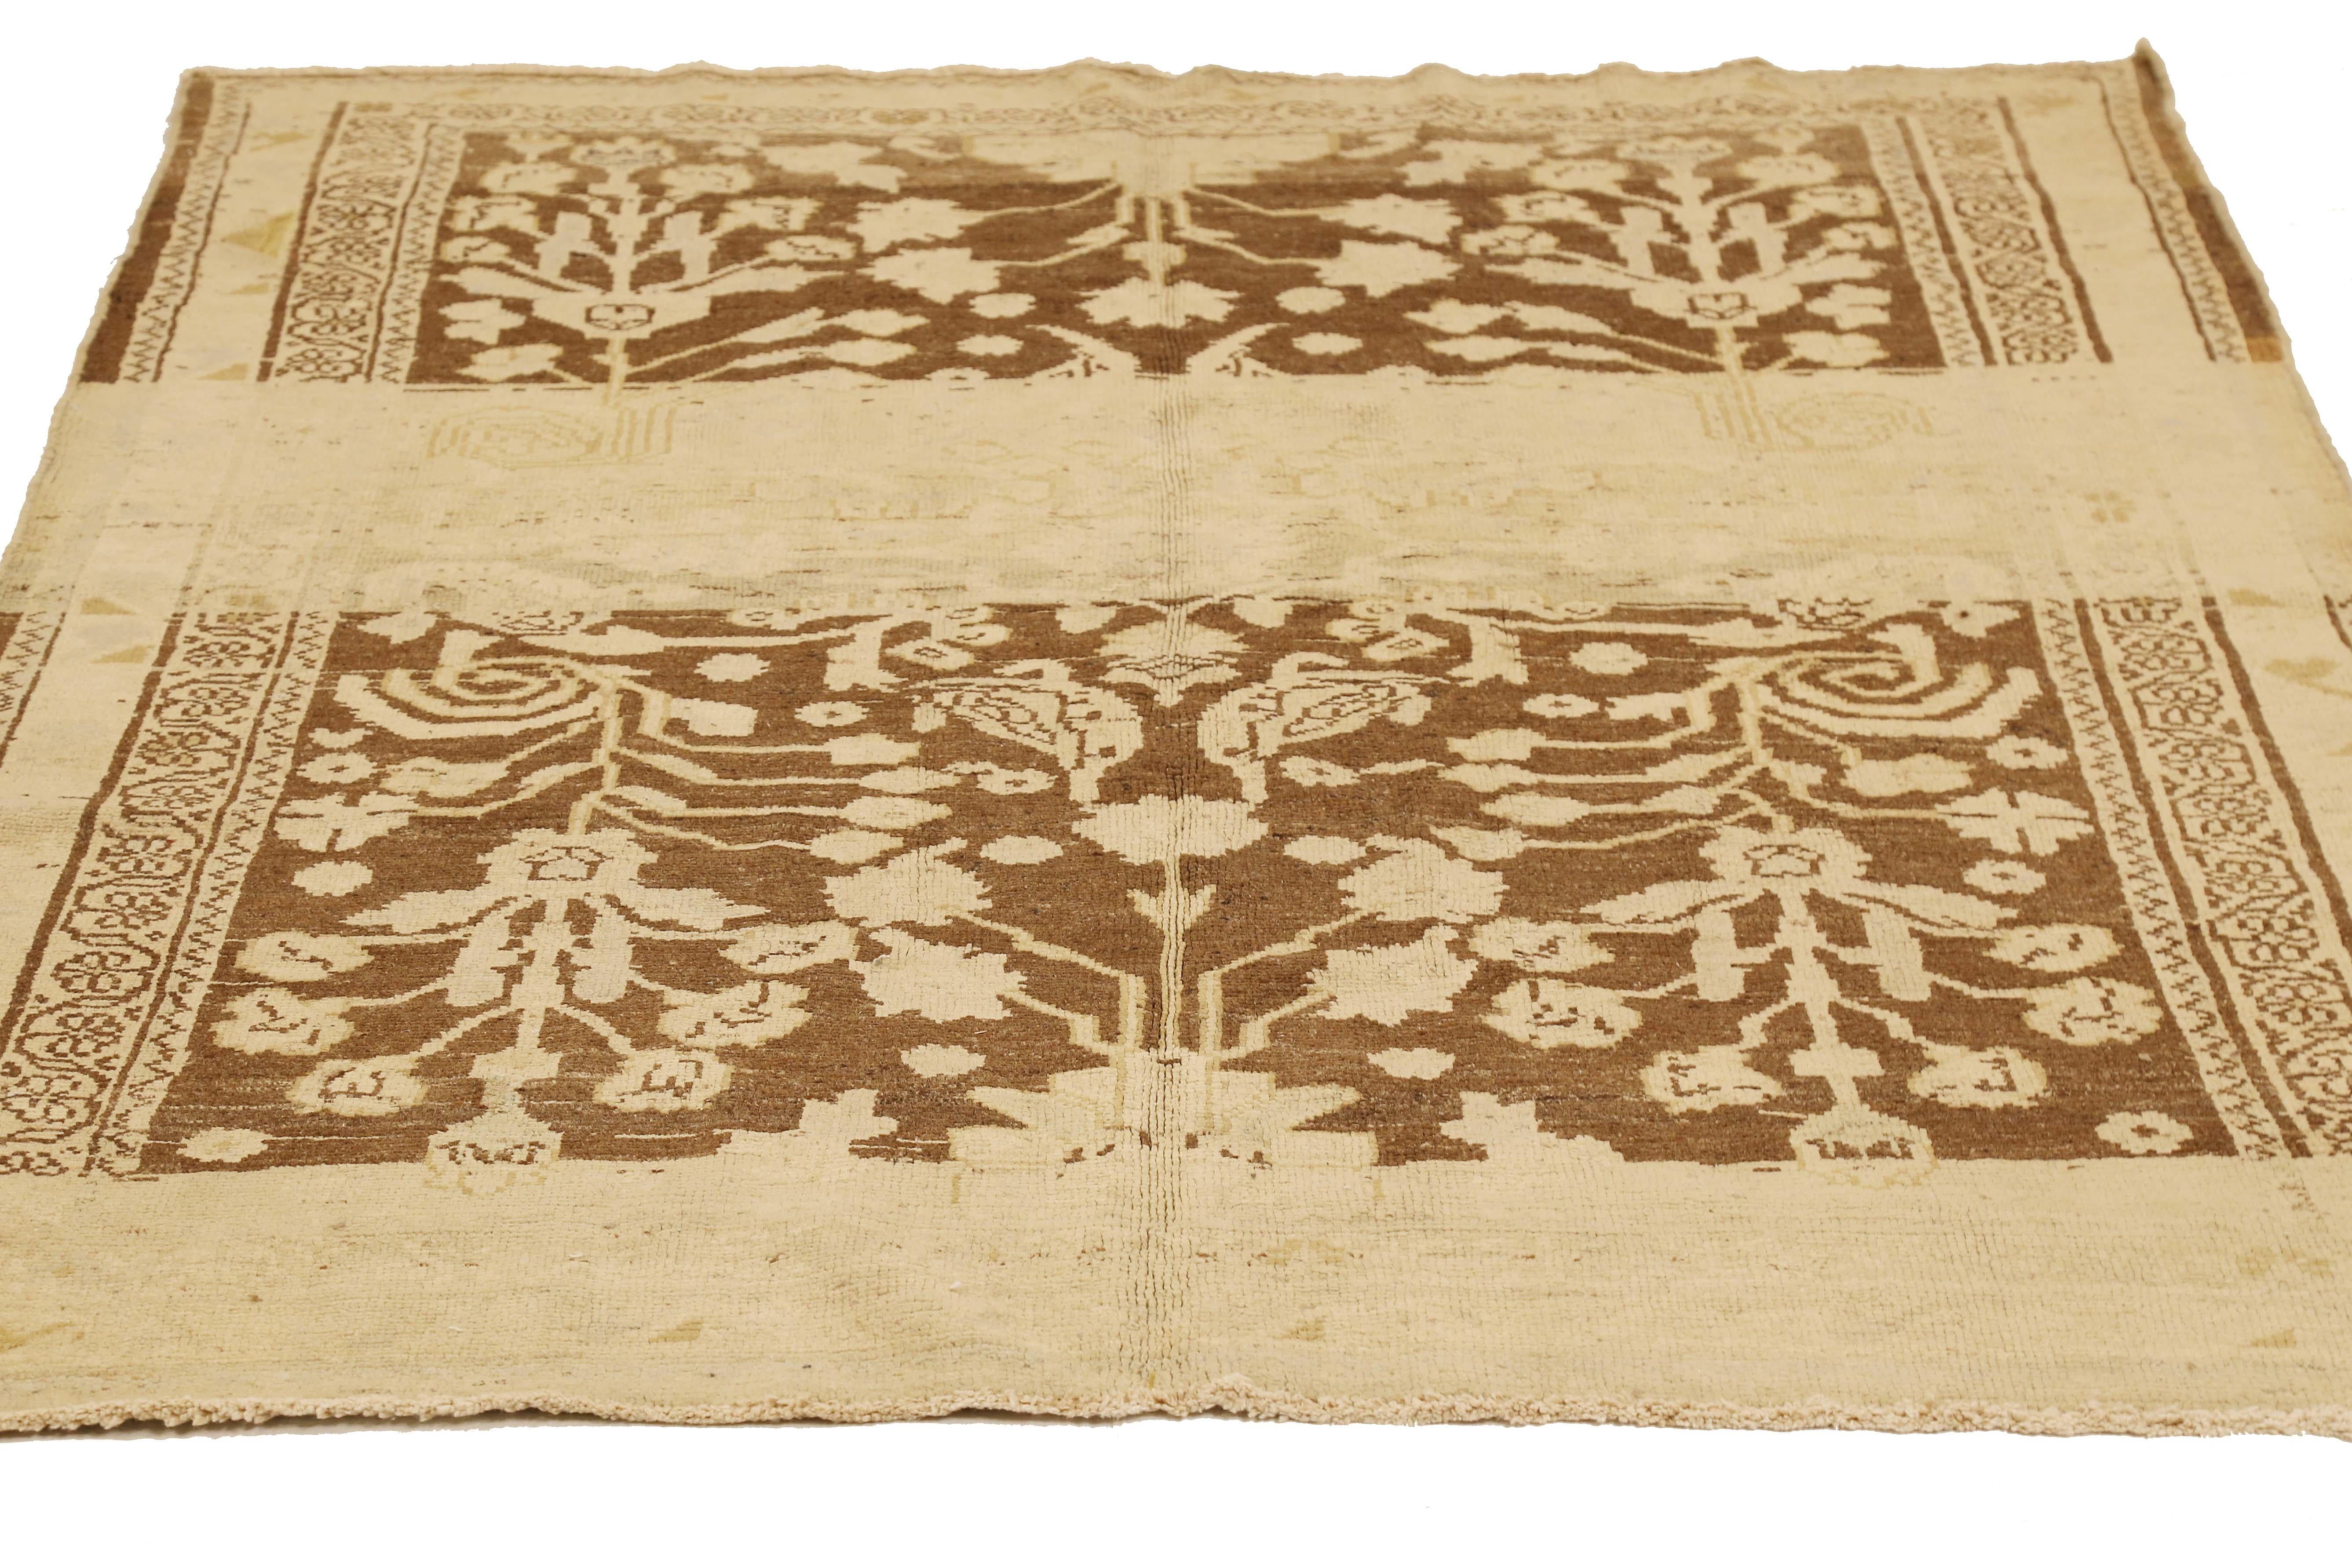 Antique Persian rug handwoven from the finest sheep’s wool and colored with all-natural vegetable dyes that are safe for humans and pets. It’s a traditional Malayer design featuring ivory floral details over a brown field. It’s a lovely piece to